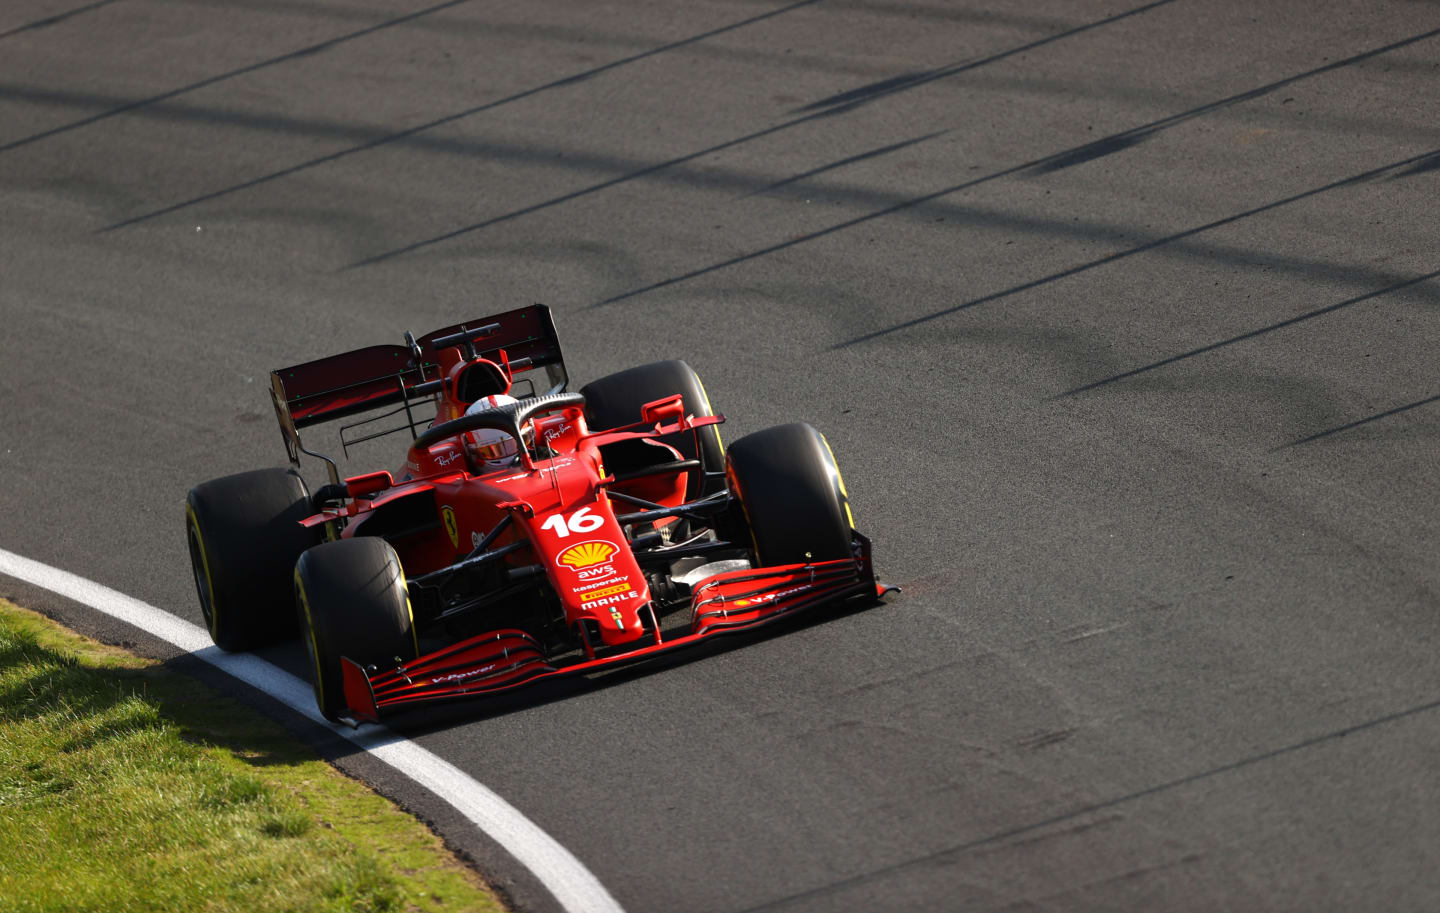 ZANDVOORT, NETHERLANDS - SEPTEMBER 03: Charles Leclerc of Monaco driving the (16) Scuderia Ferrari SF21 during practice ahead of the F1 Grand Prix of The Netherlands at Circuit Zandvoort on September 03, 2021 in Zandvoort, Netherlands. (Photo by Bryn Lennon/Getty Images)